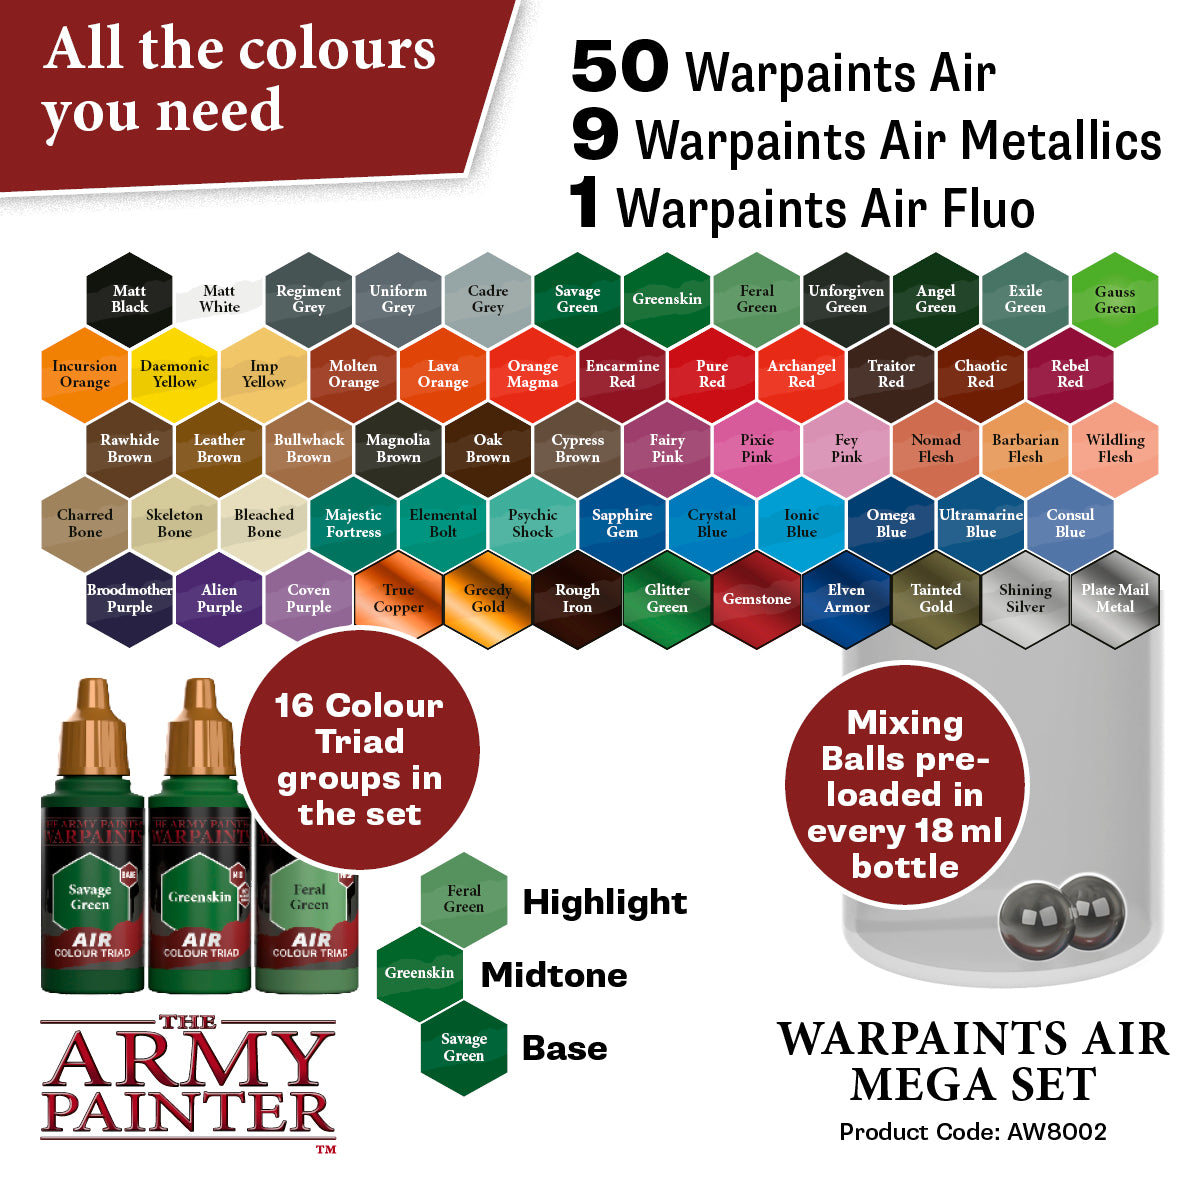 The Army Painter - Air Color Triad Majestic Fortress – Not Just Gamin